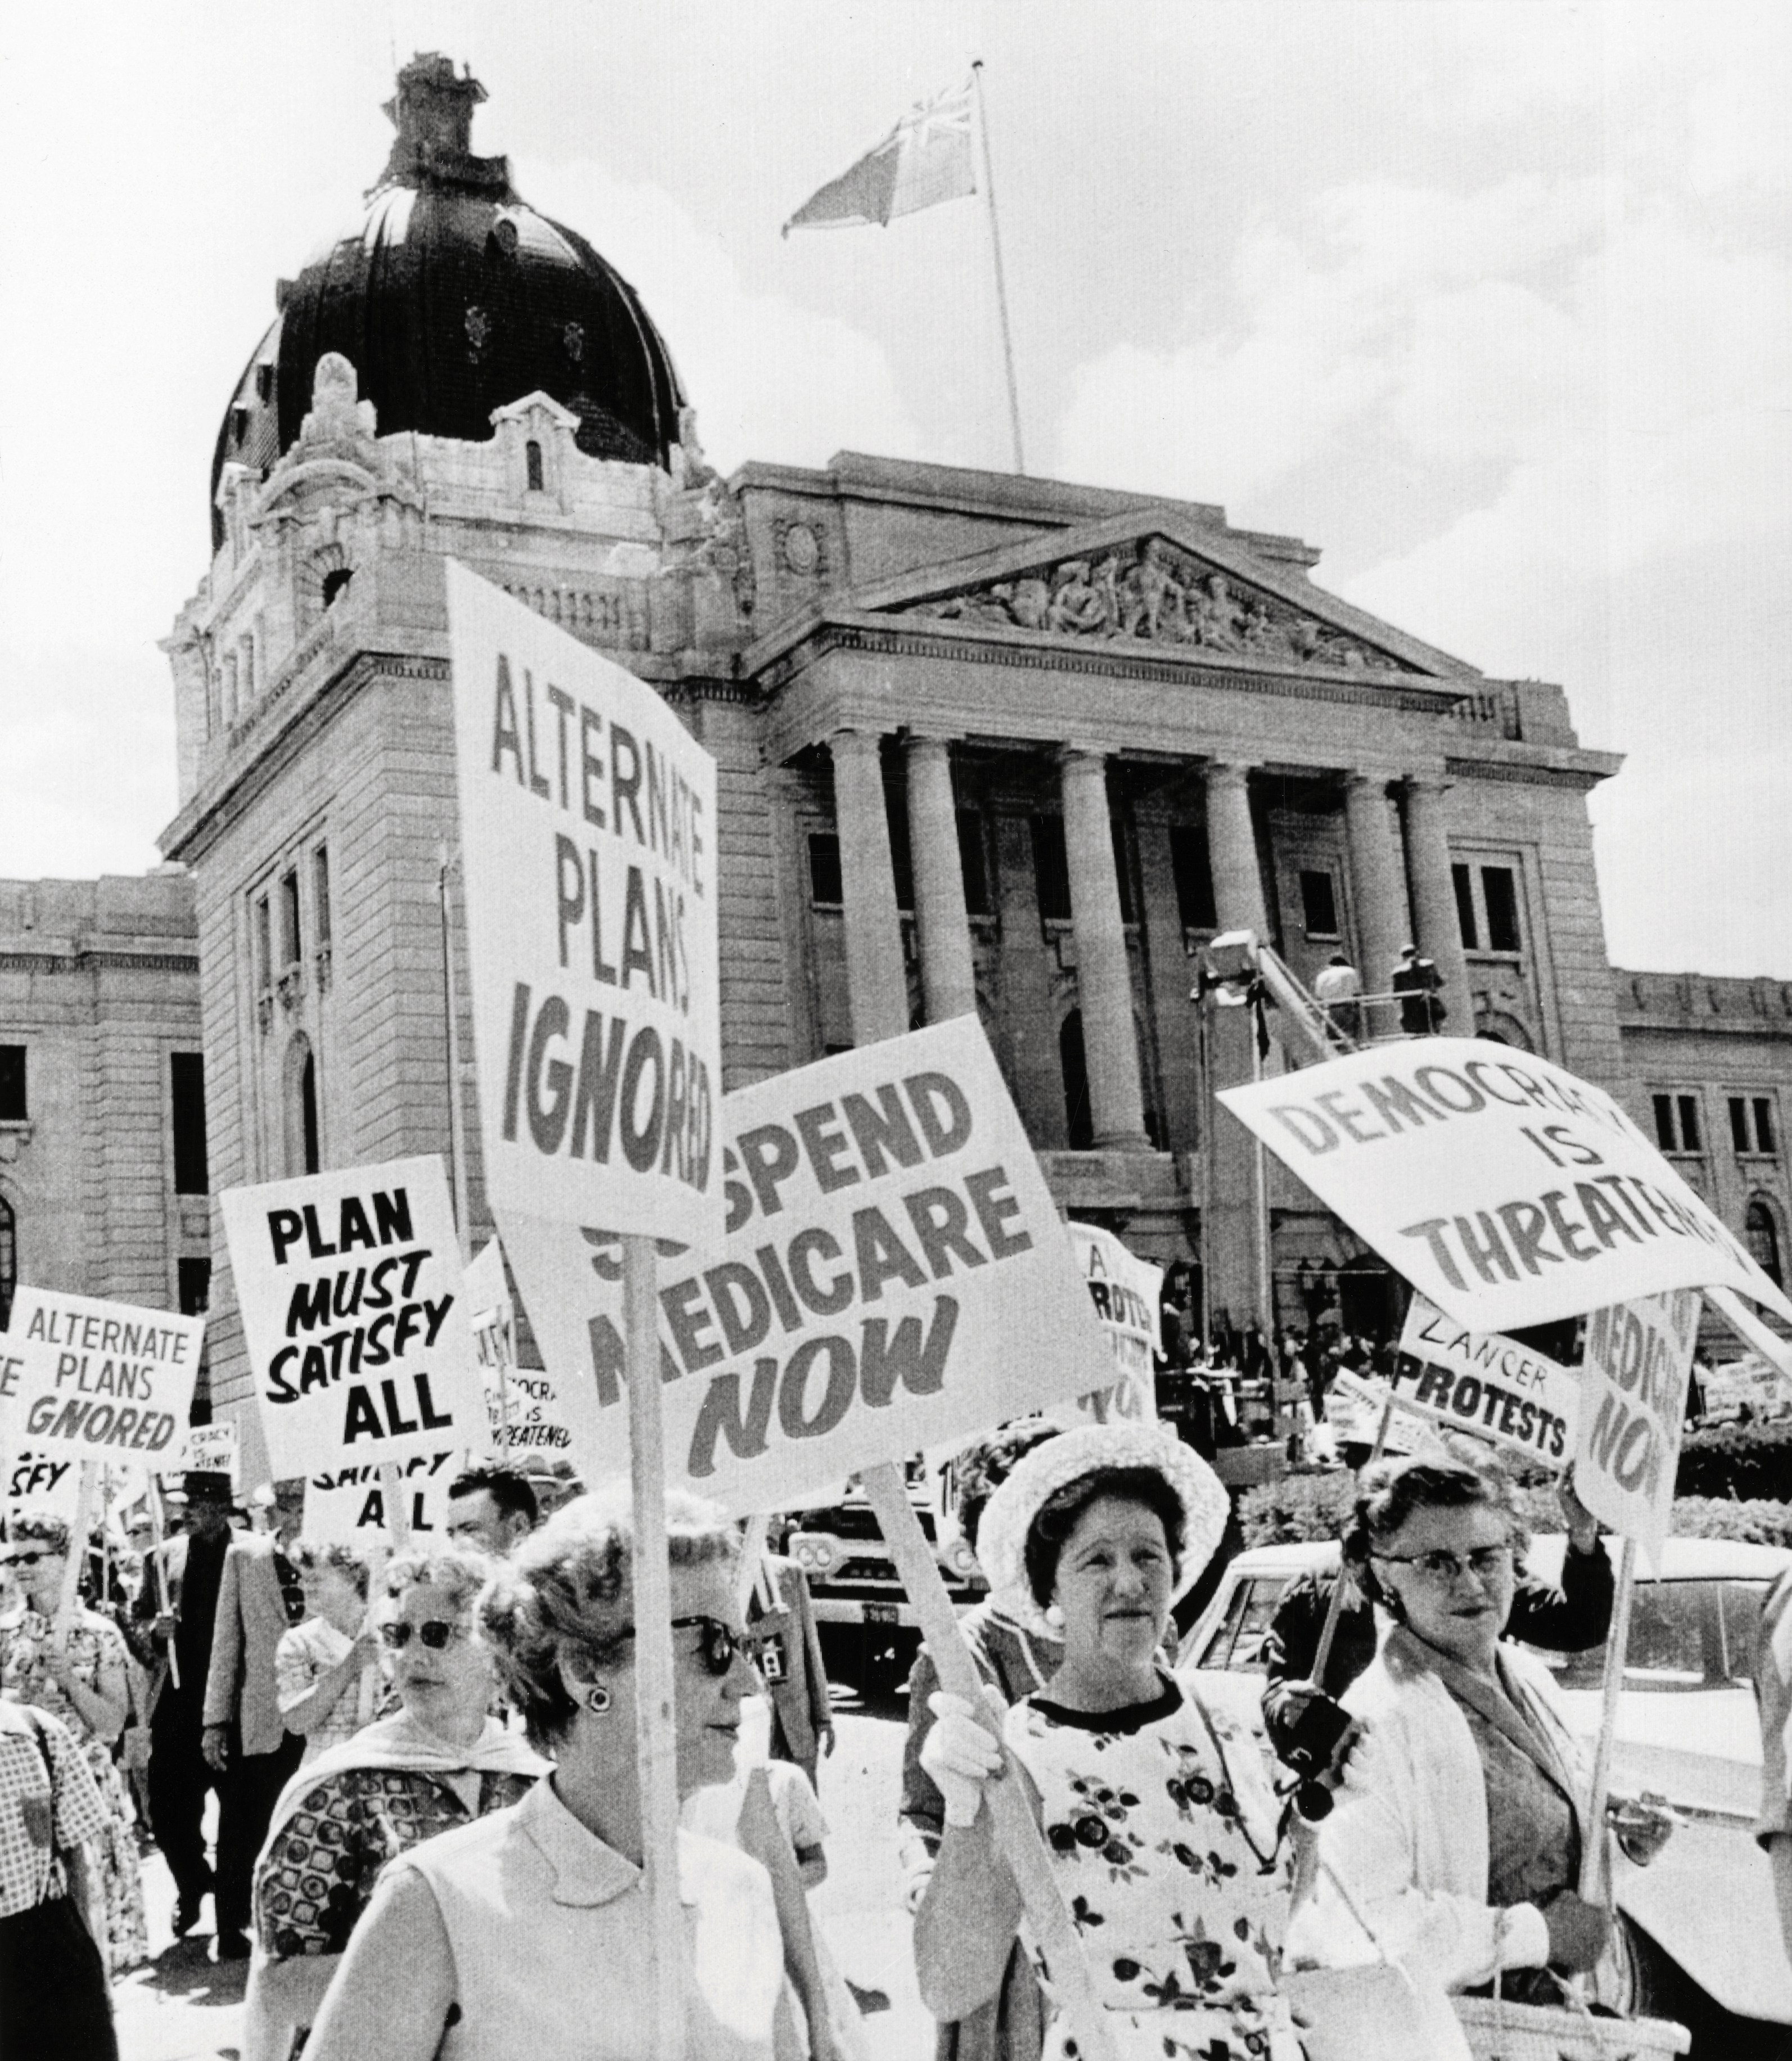 Thousands of anti-government protestors rallied against Medicare in Regina, Saskatchewan, on July 11, 1962, in Canada.